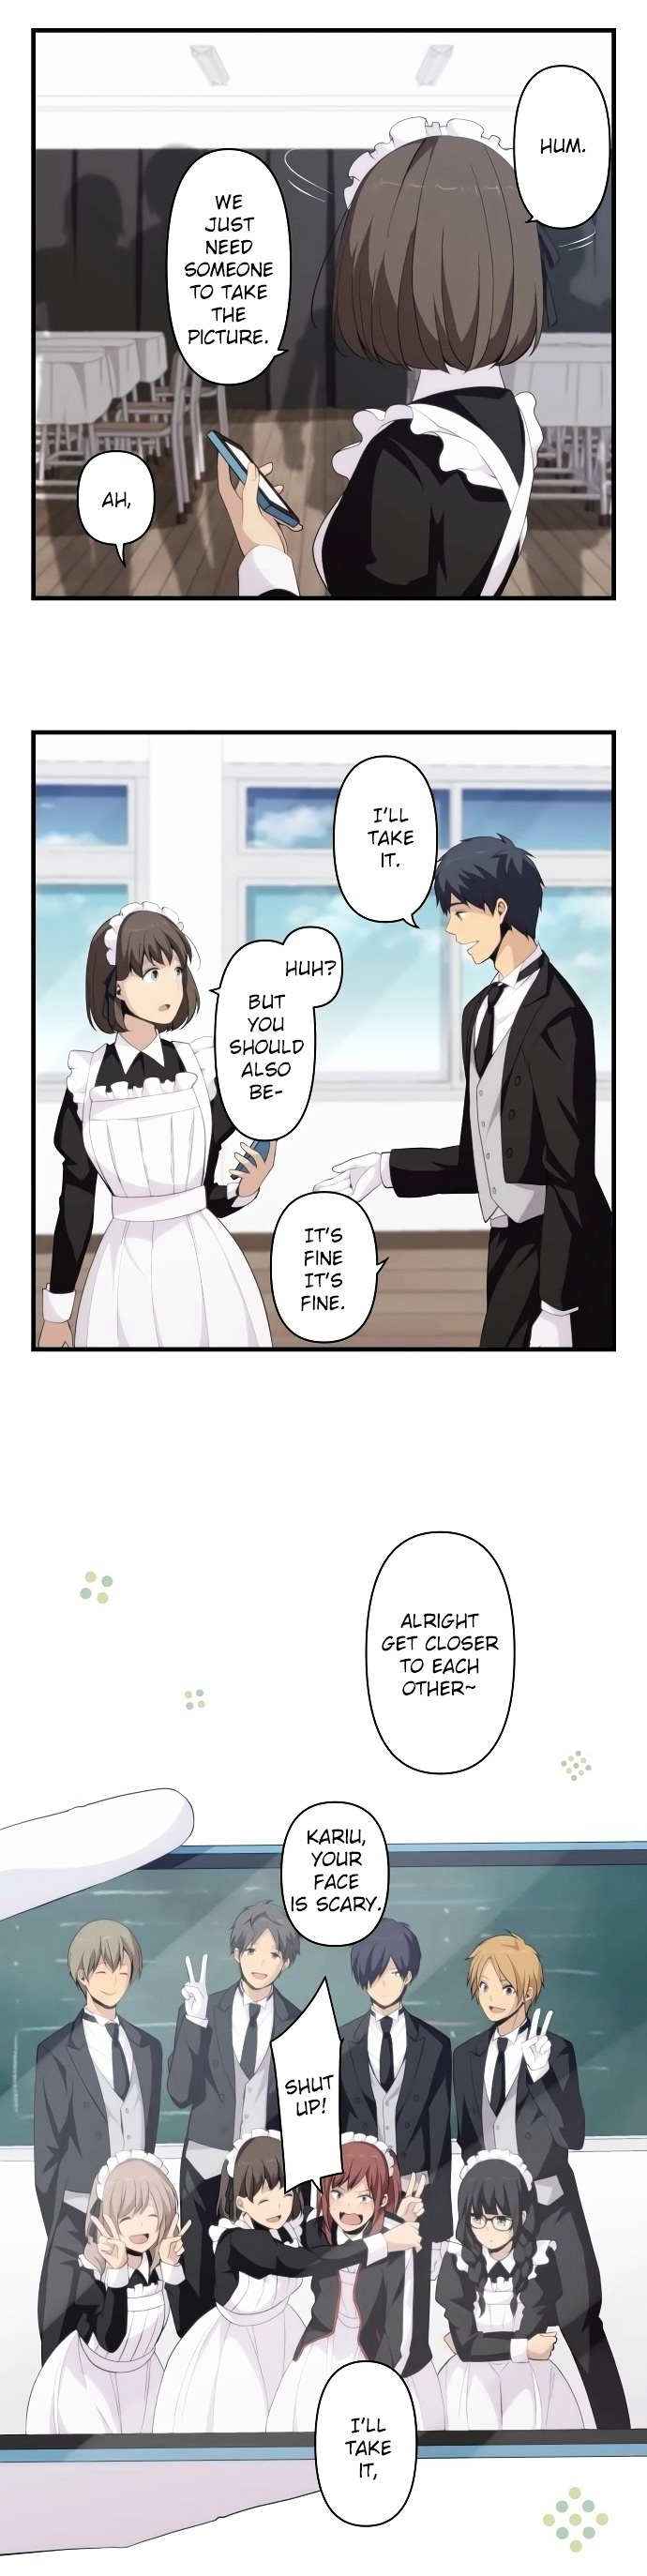 ReLIFE - Chapter 144.2 Page 5